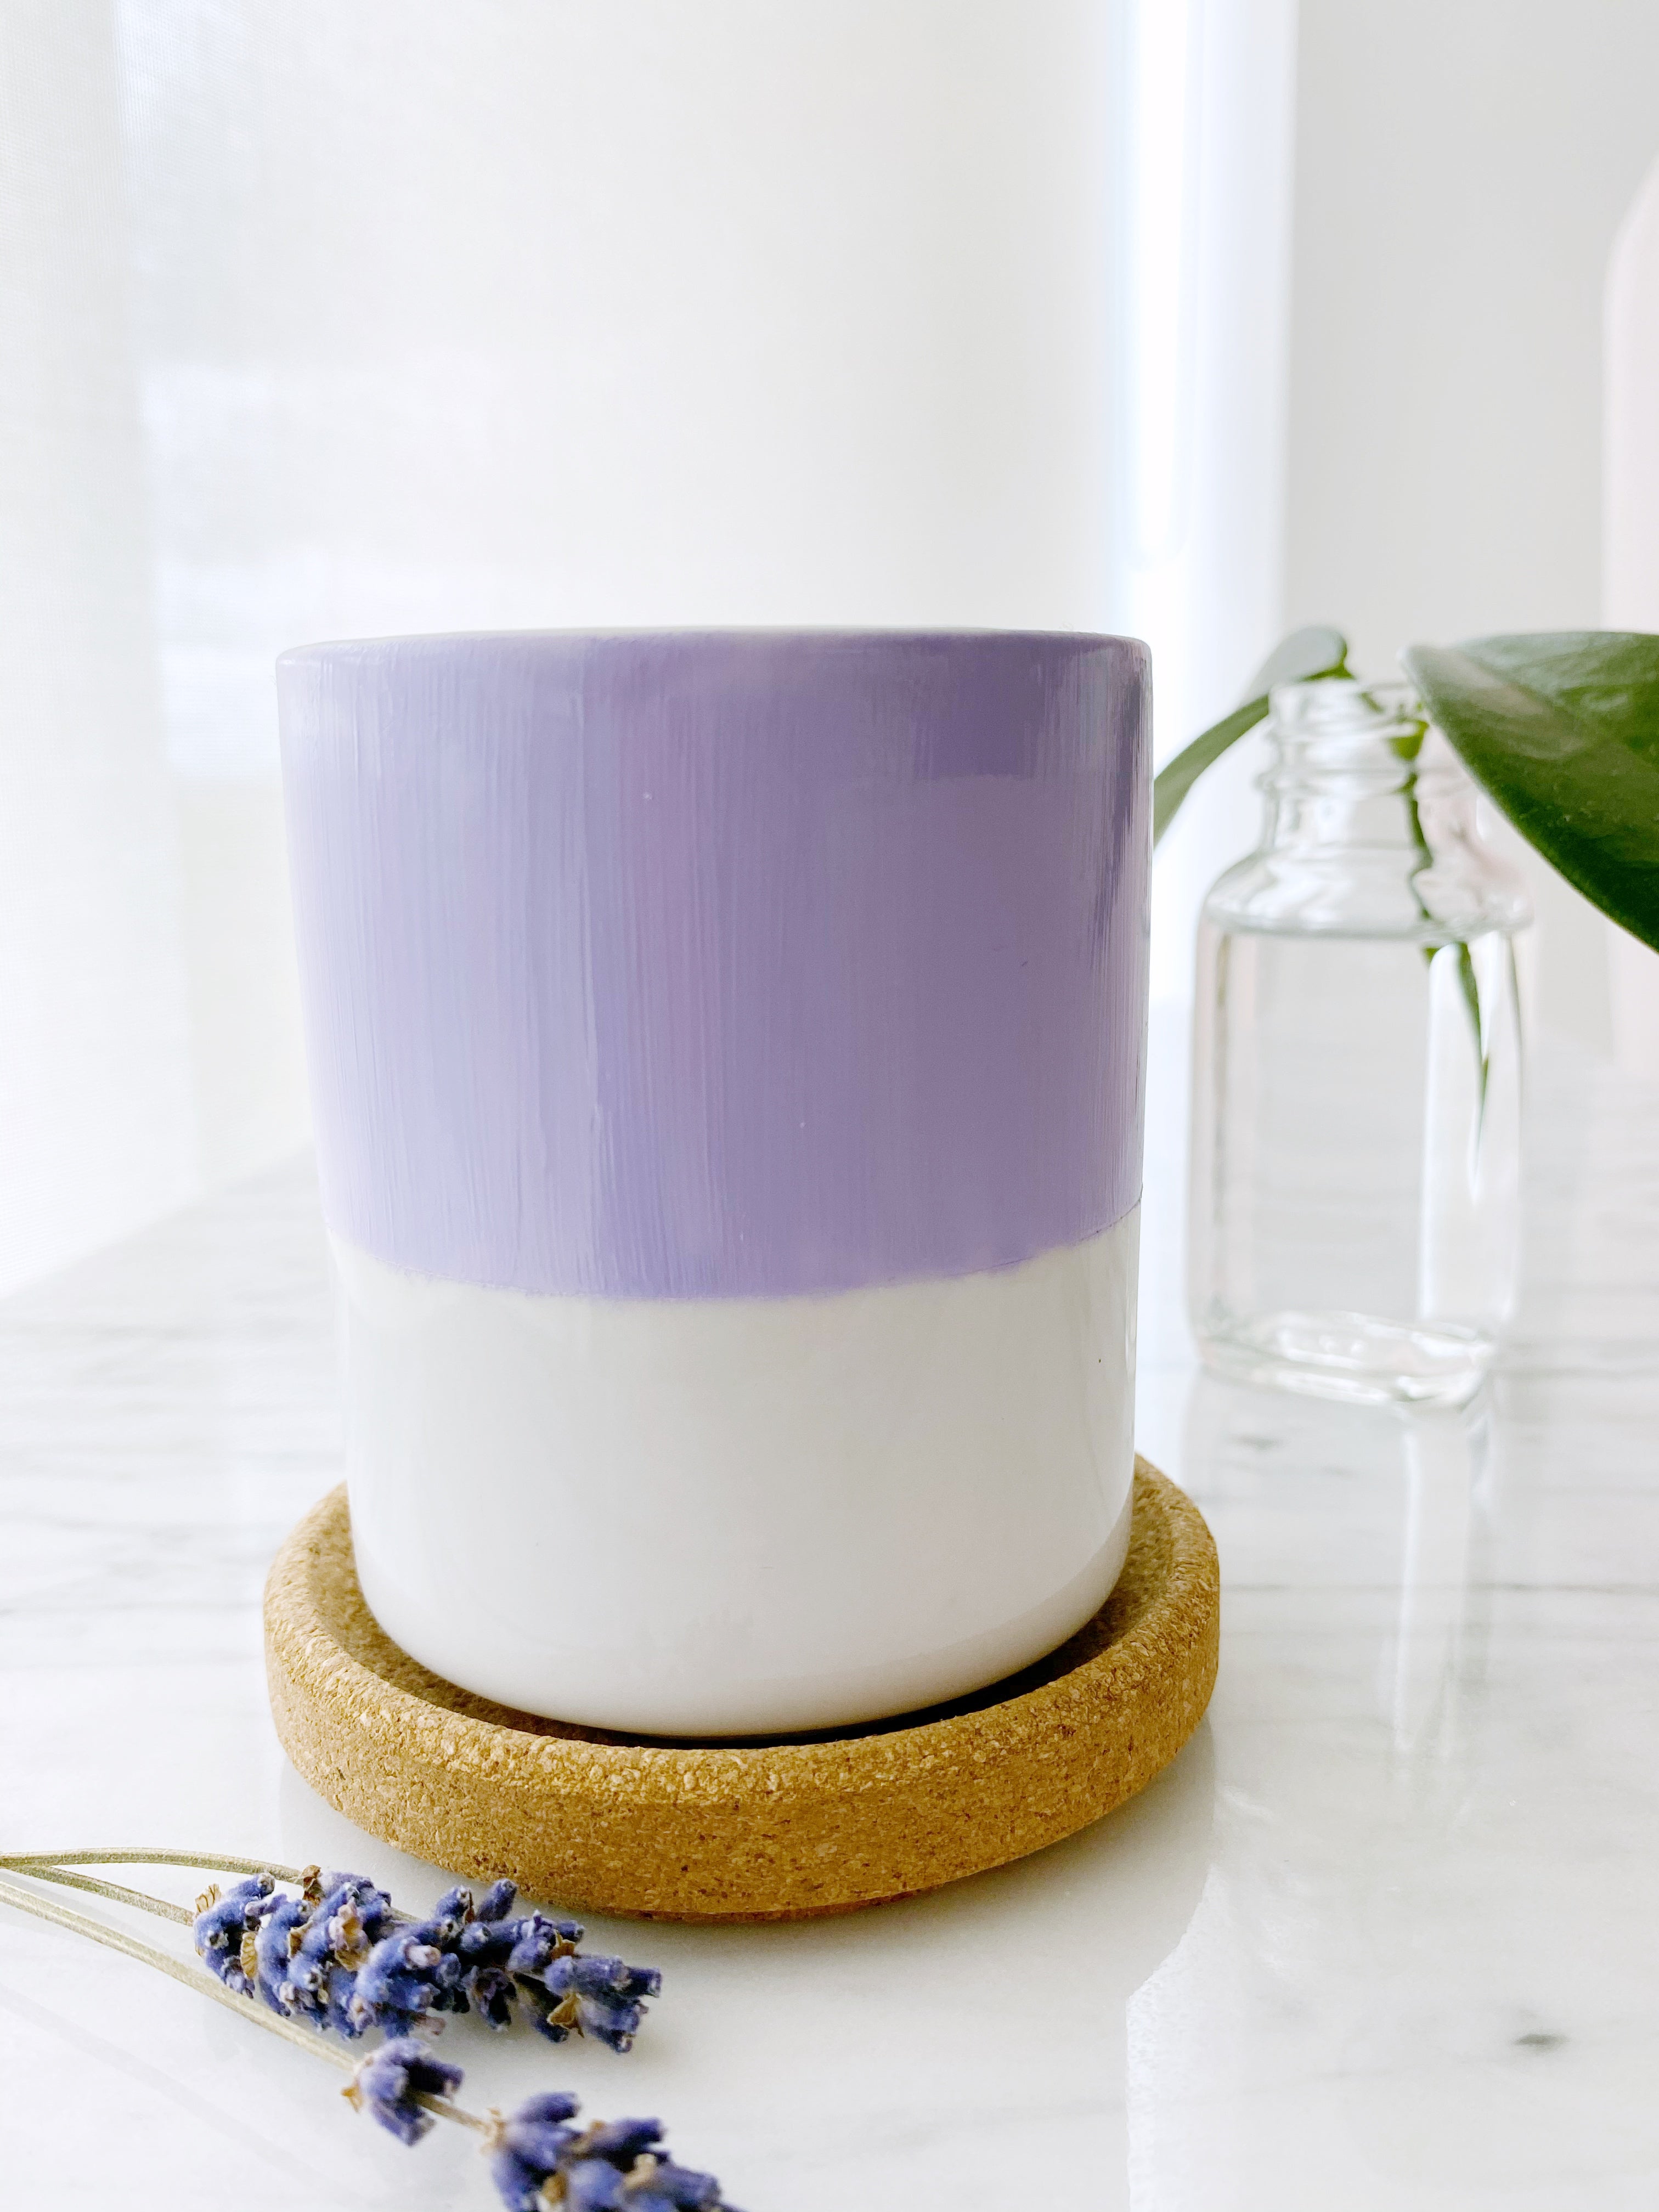 Hand Painted Porcelain Small Planter with Pure Soy Candle - Lilac Colour Block